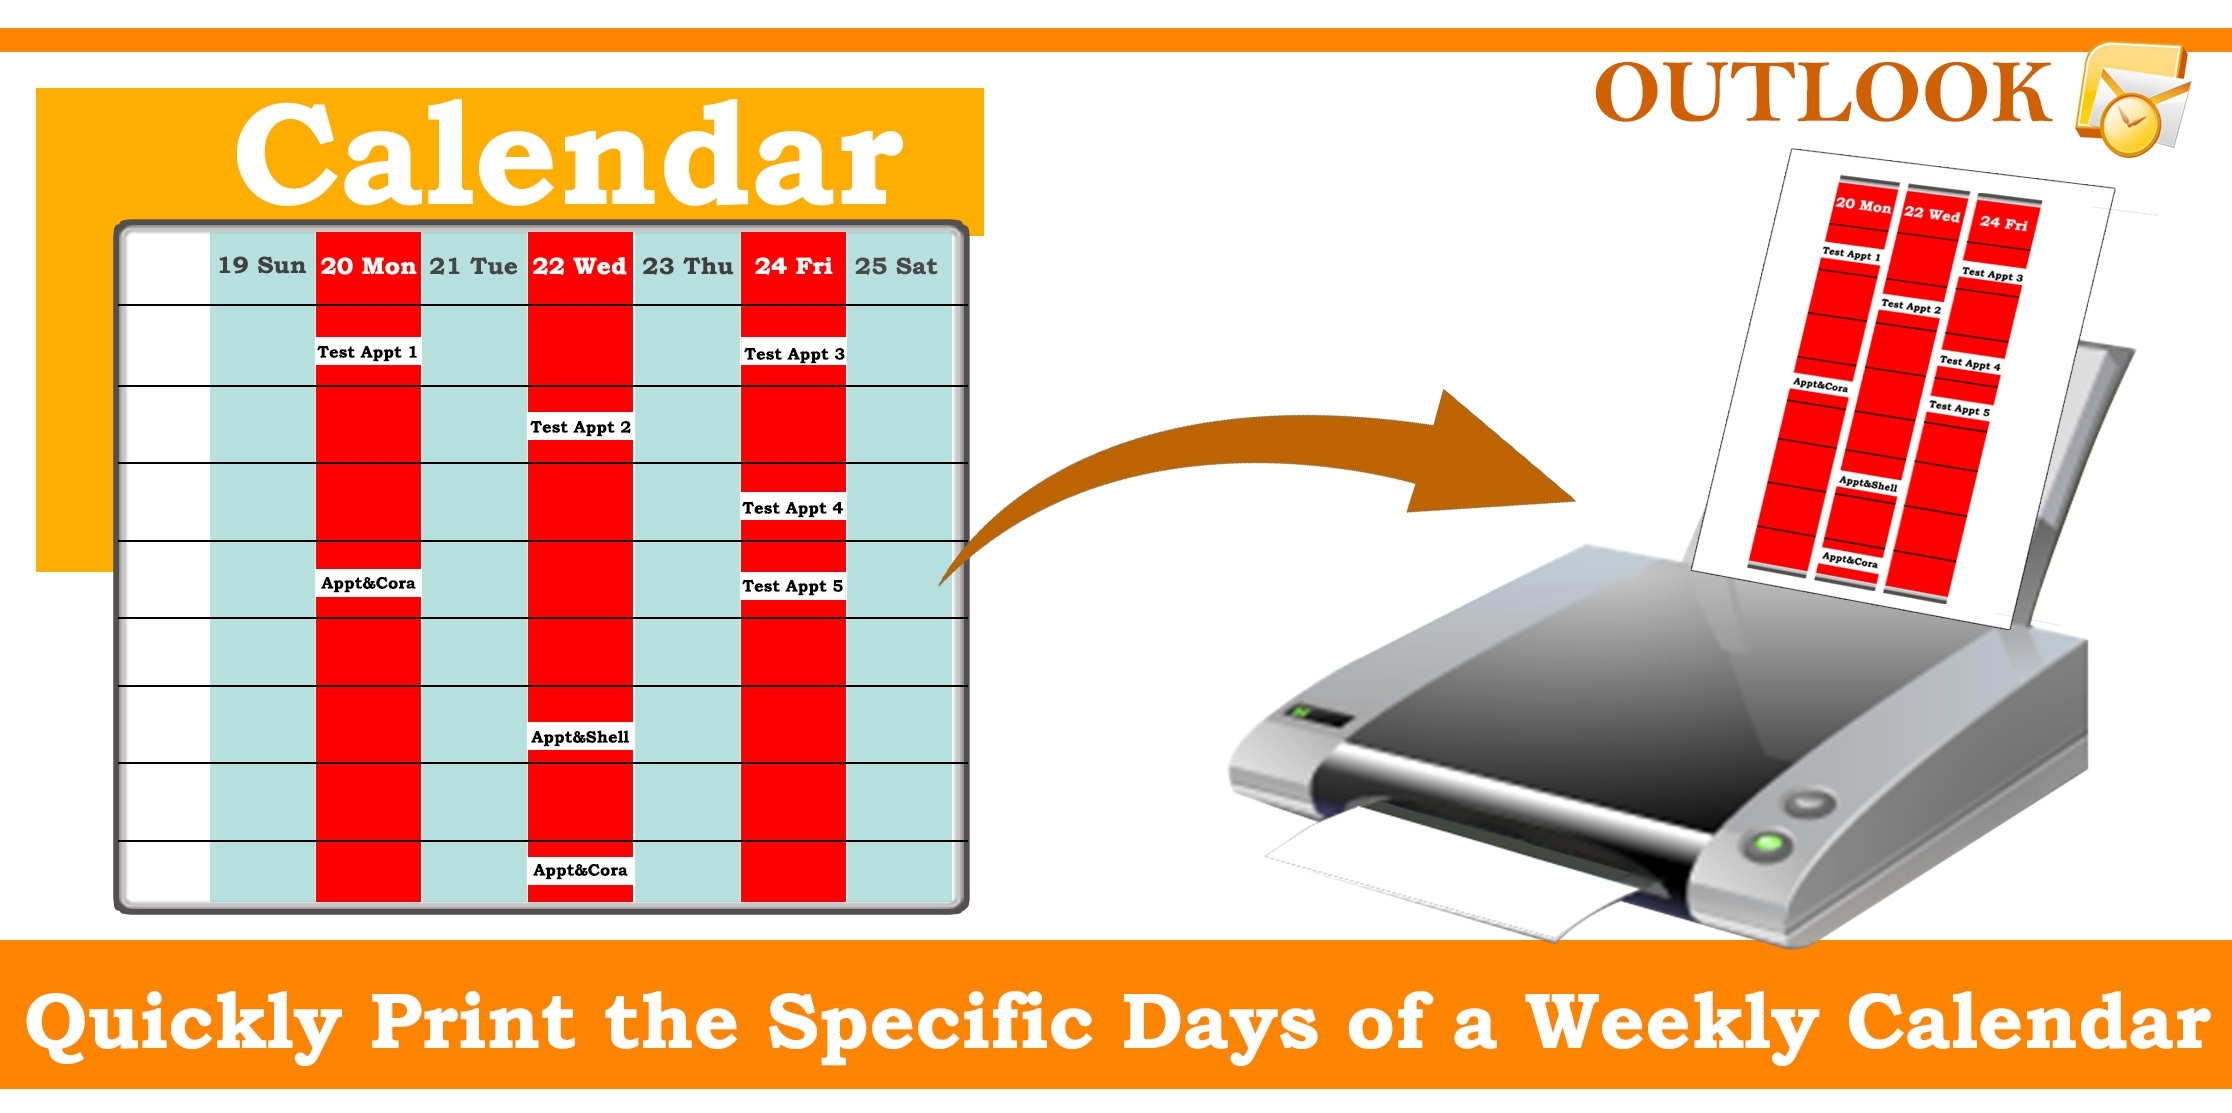 How To Quickly Print The Specific Days Of A Weekly Calendar